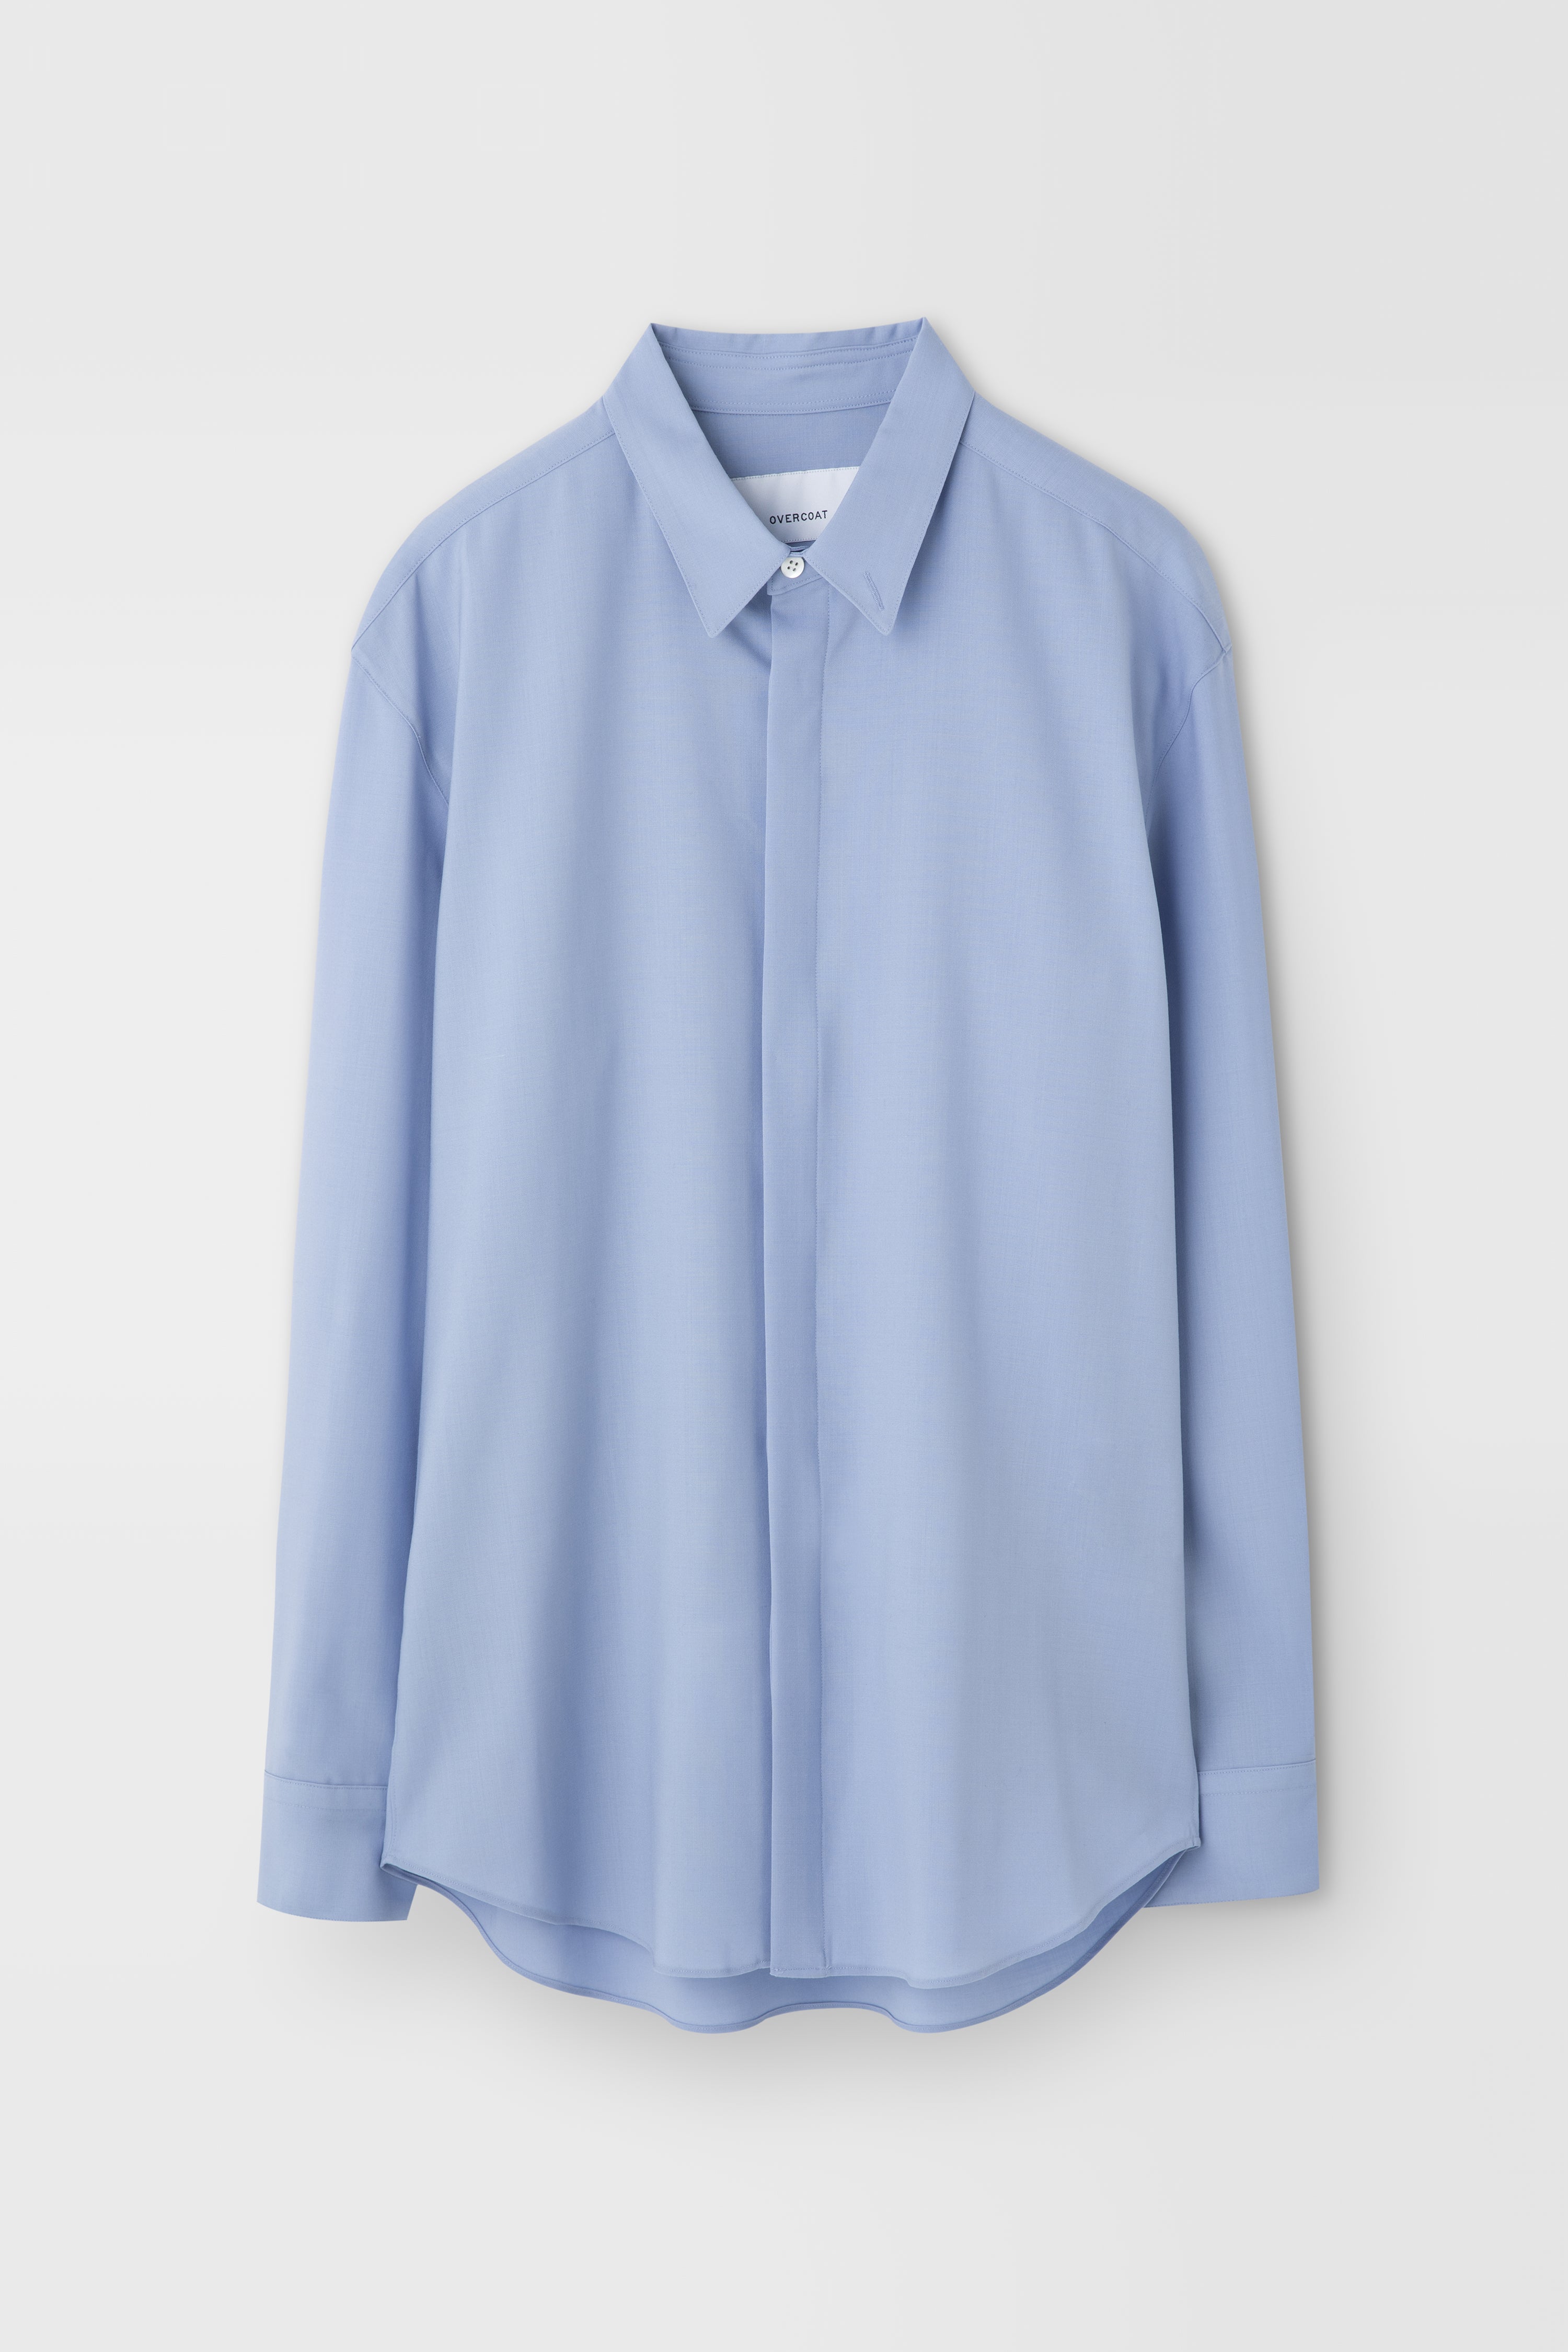 Classic Wool Shirt in Saxe Blue – OVERCOAT